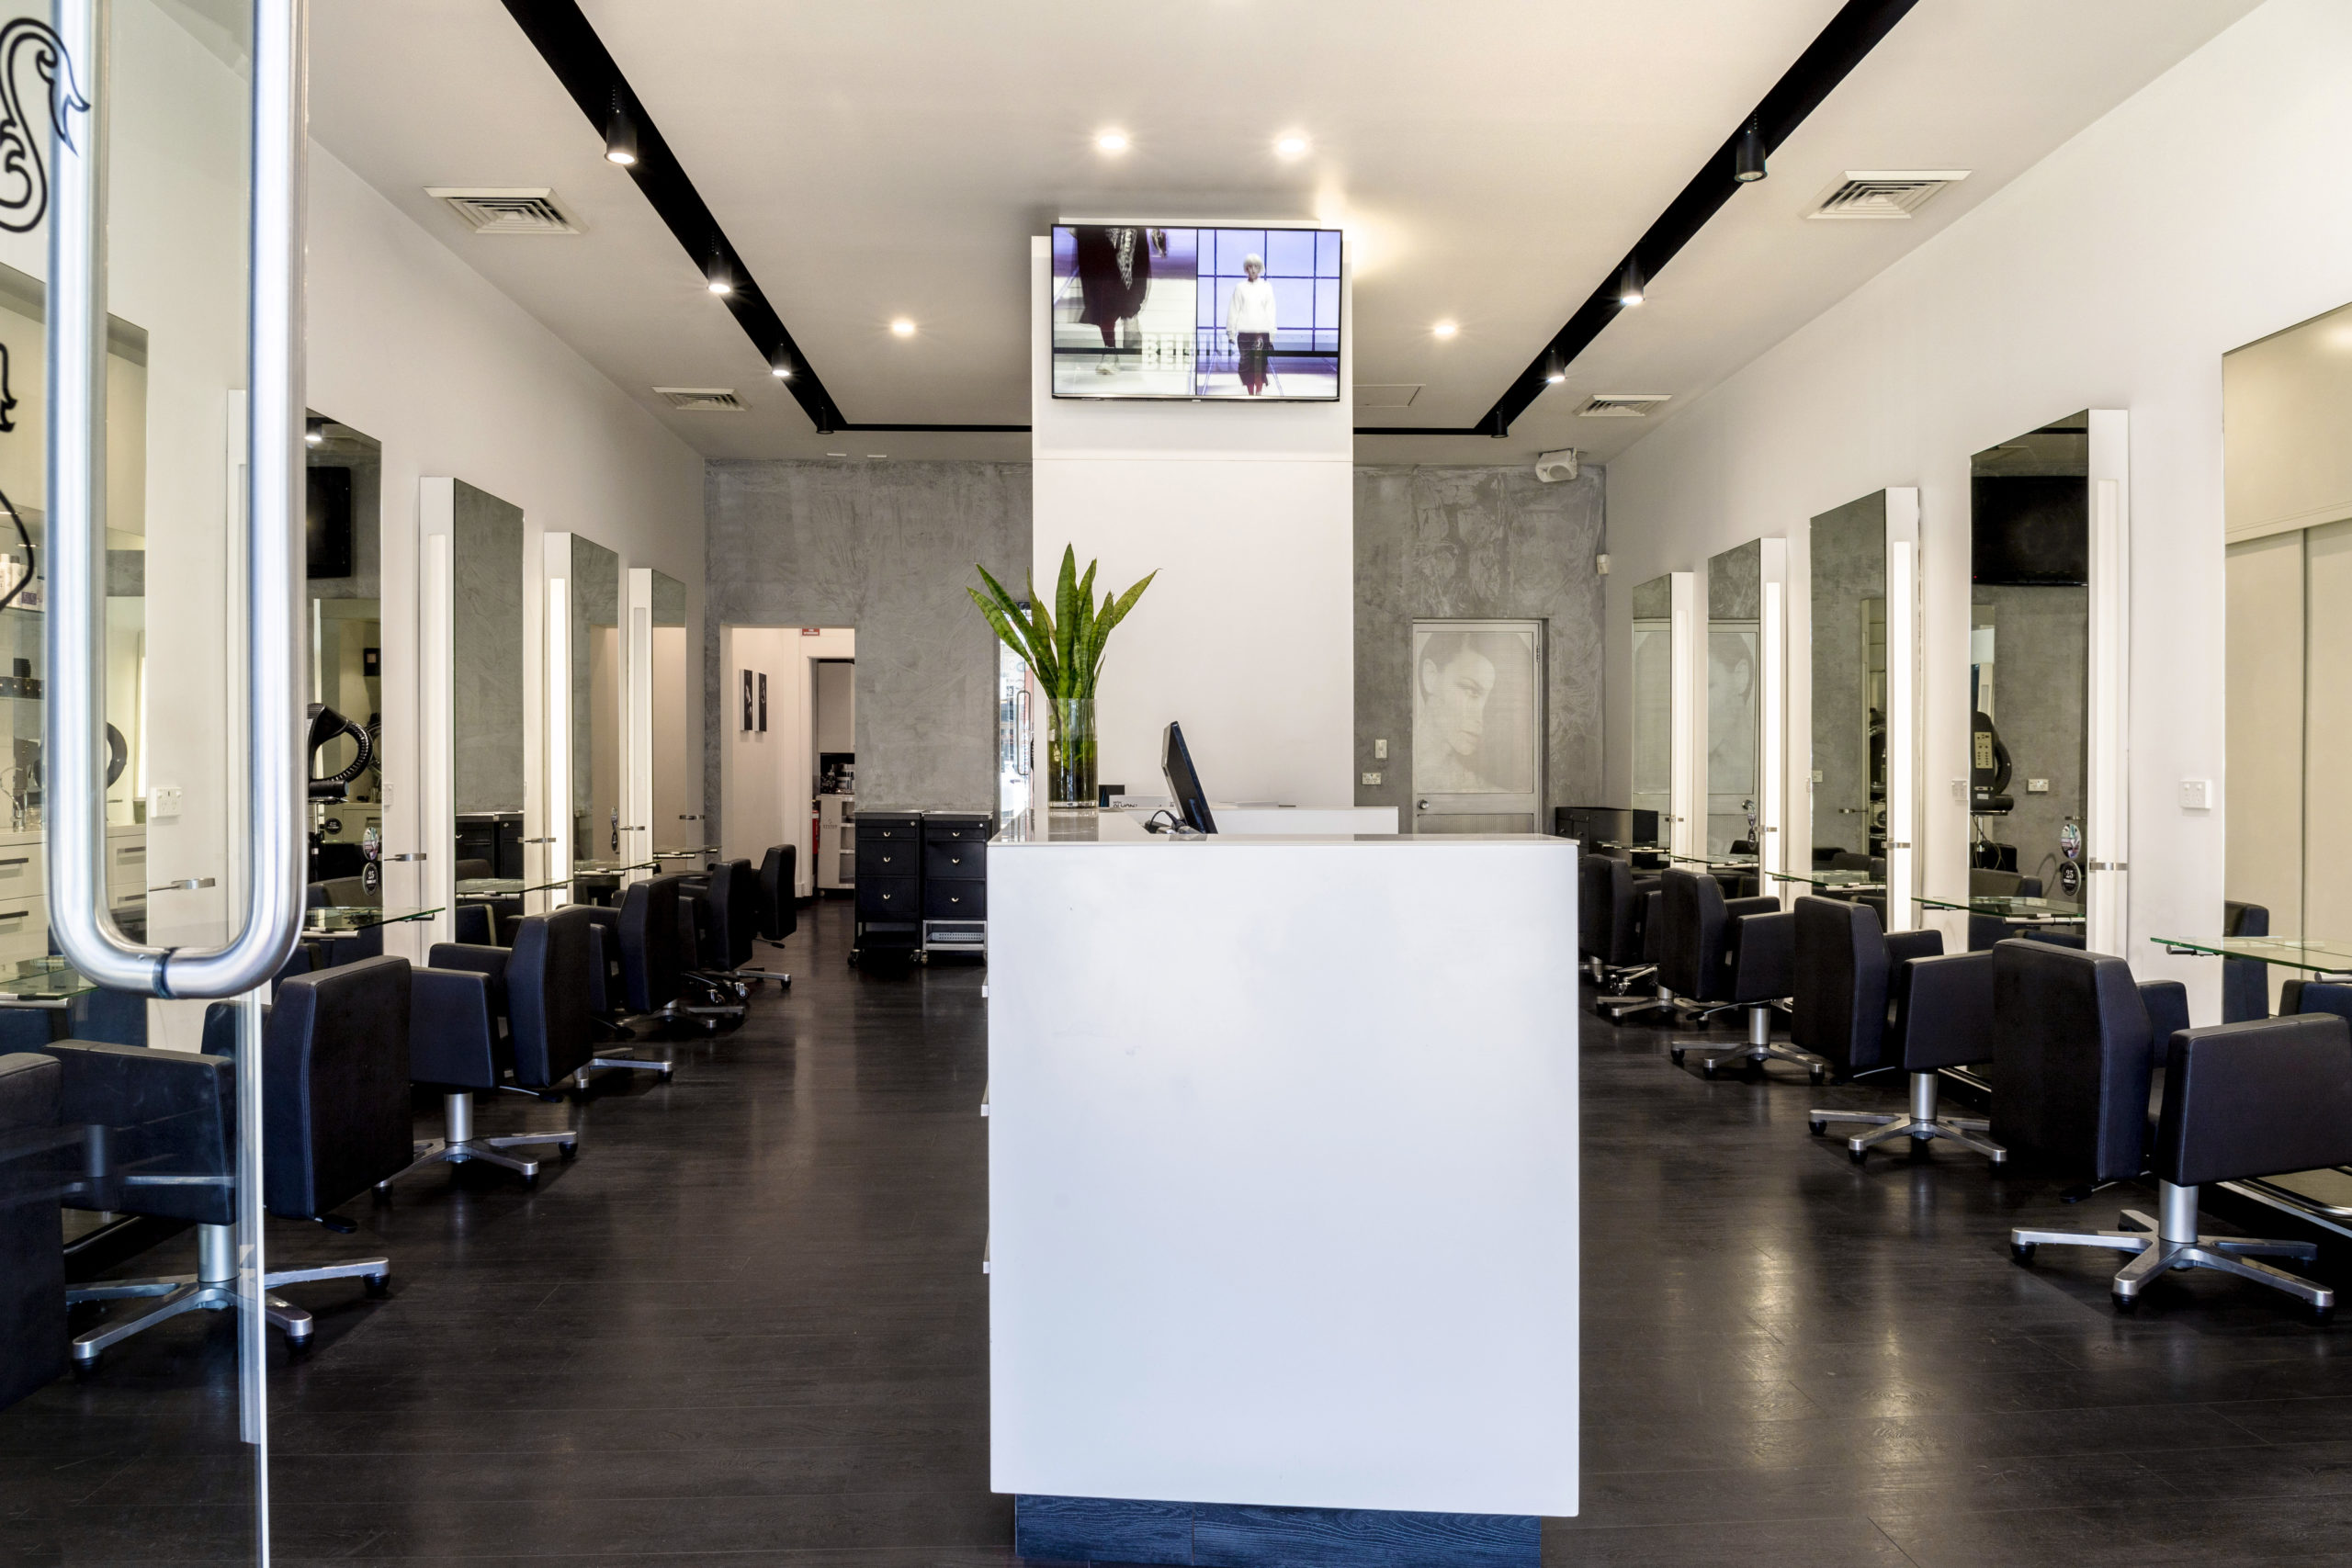 Lane Cove Hair Salon - Find the best hairdresser near you | TONI&GUY